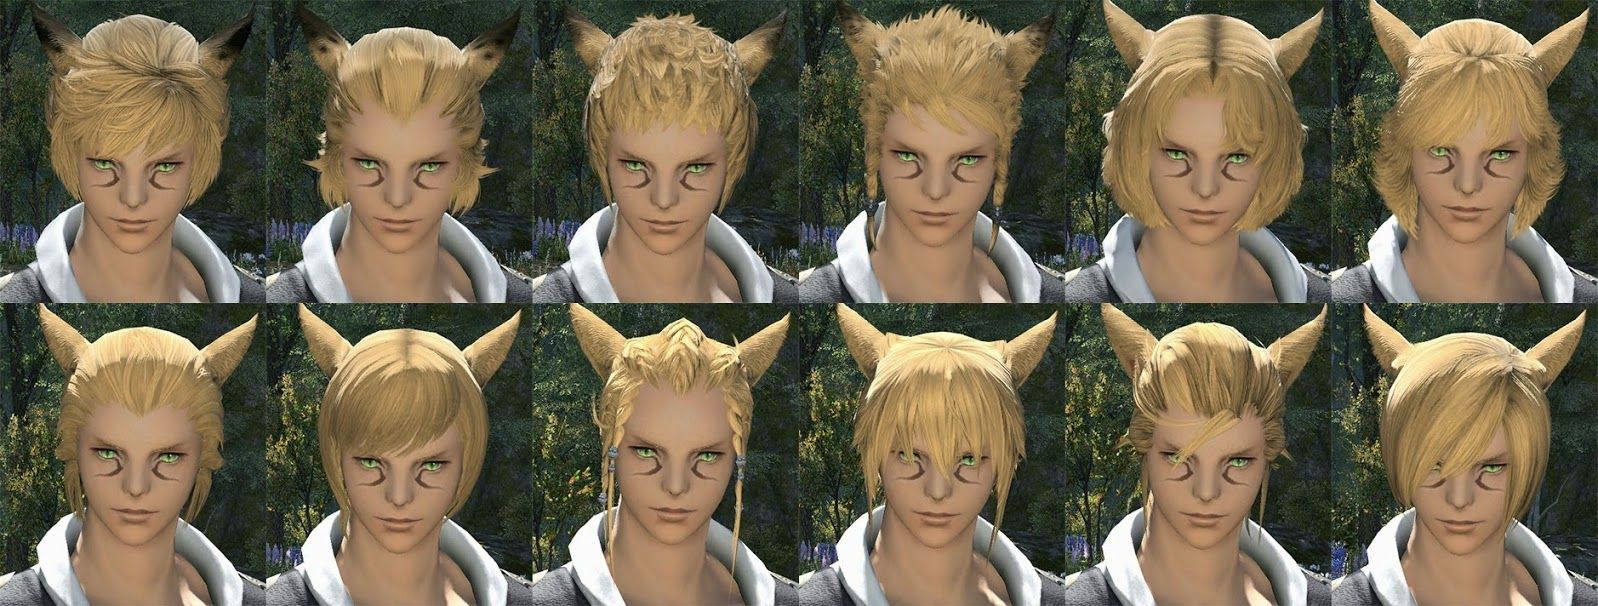 Ffxiv Male Hairstyles
 Miqo'te Male Hair 1598×606 With images